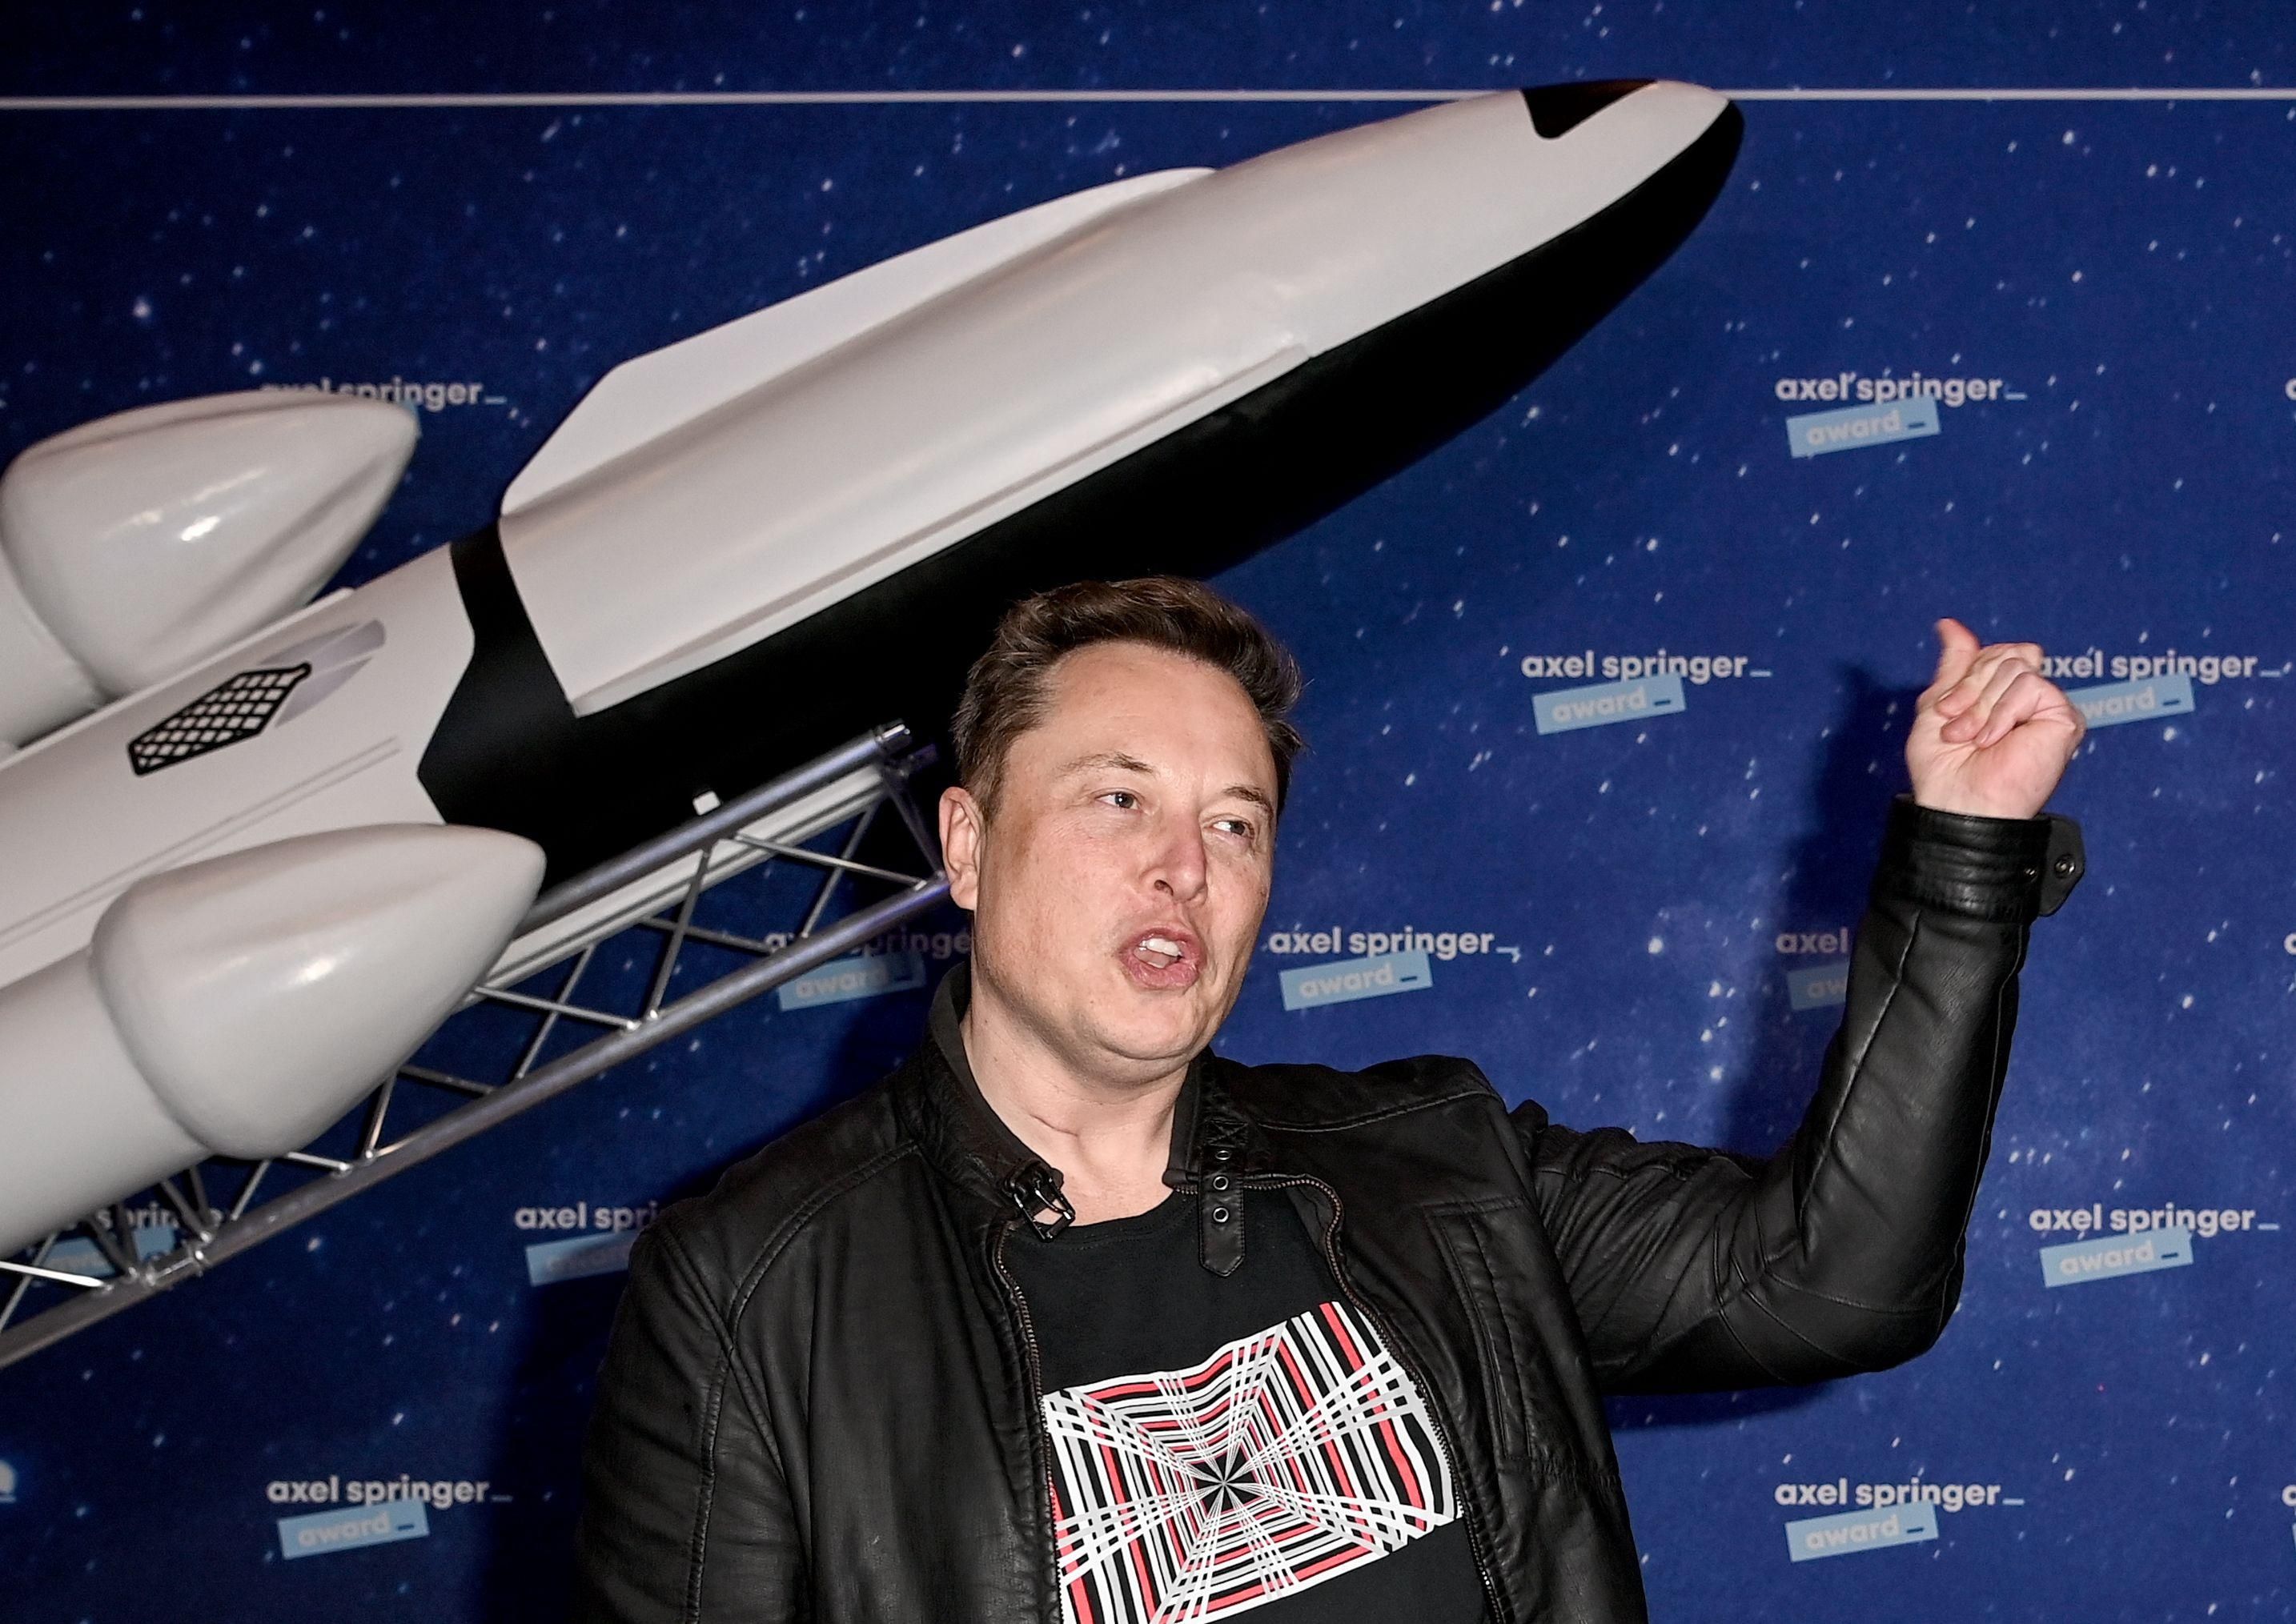 SpaceX owner and Tesla CEO Elon Musk poses on the red carpet of the Axel Springer Award 2020 on December 1, 2020 in Berlin, Germany. (Photo: Britta Pedersen-Pool via Getty Images)